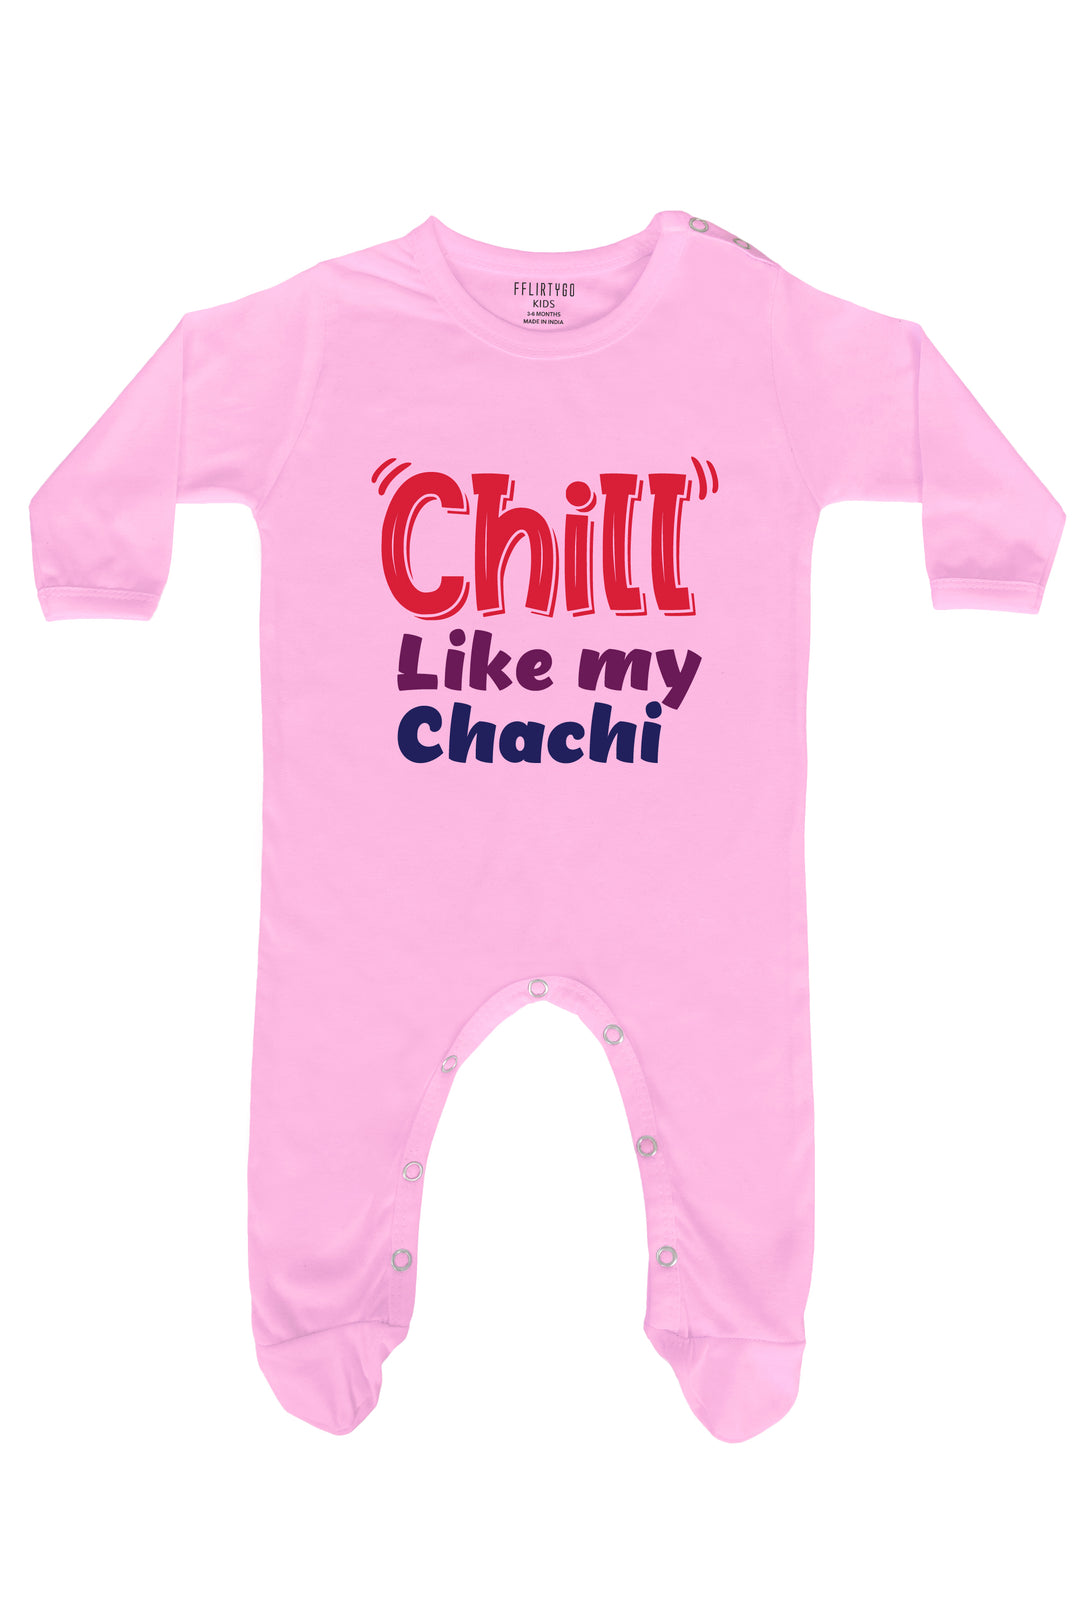 Chill Like My Chachi Baby Romper | Onesies